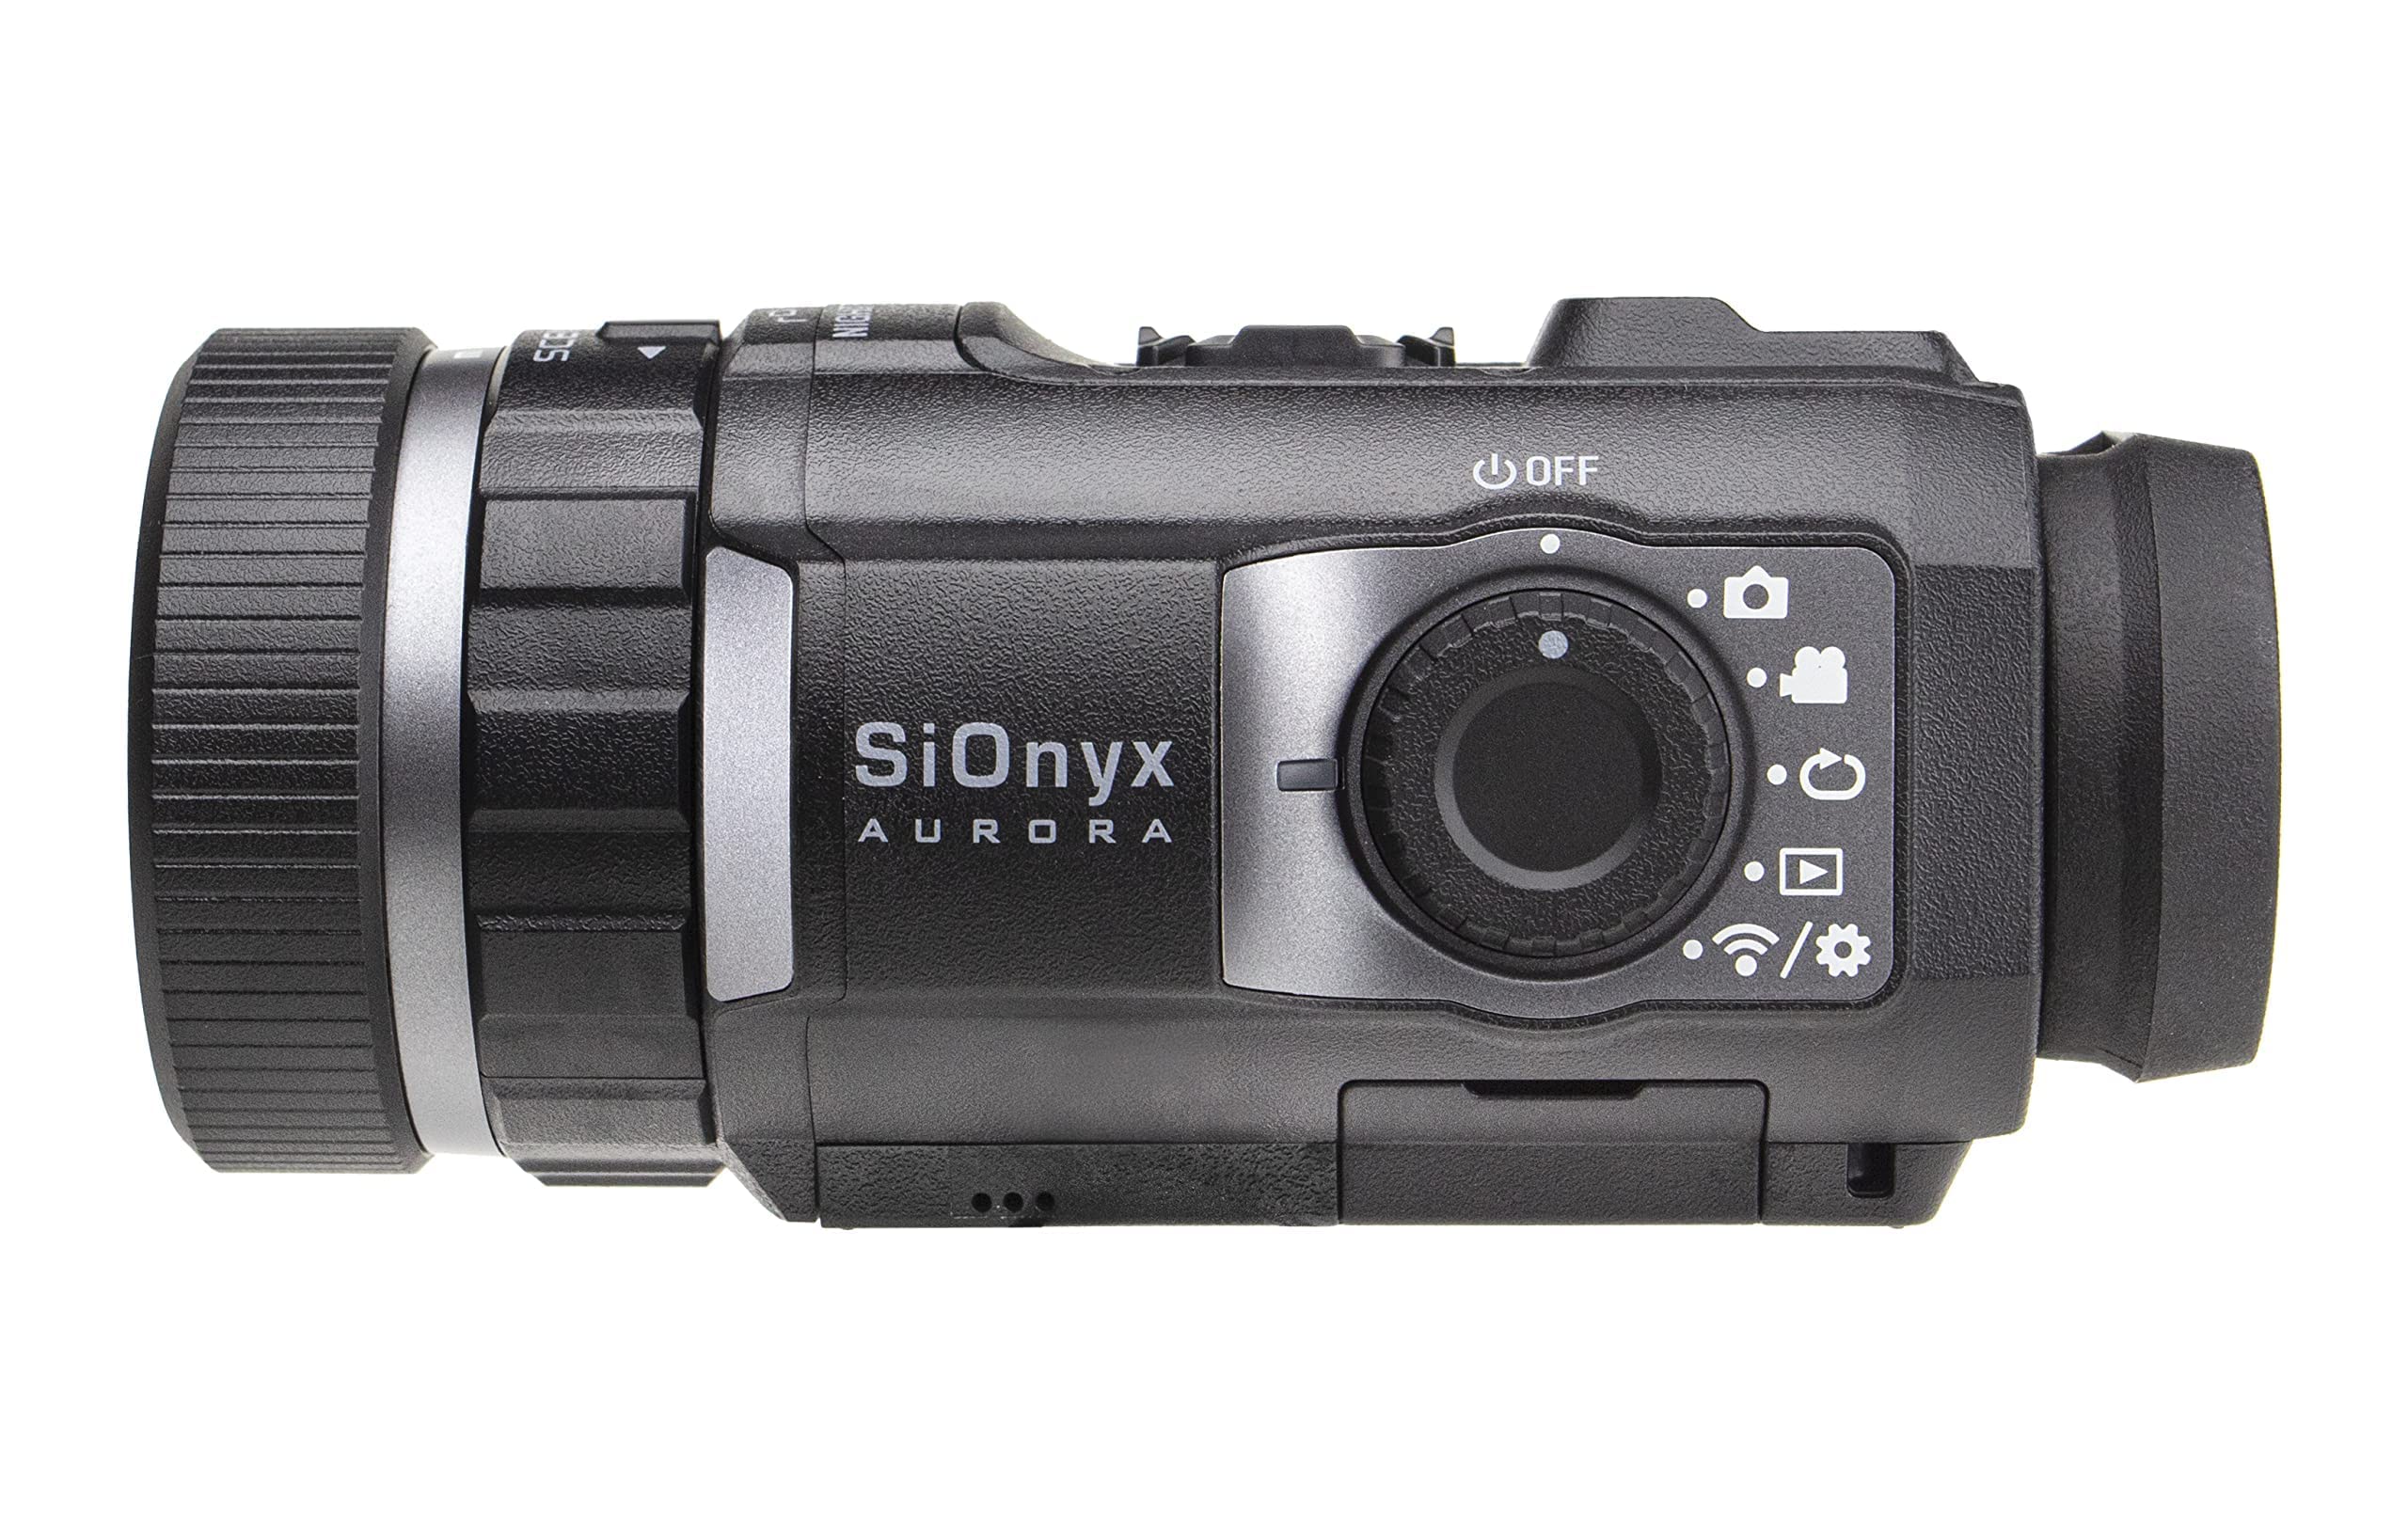 SiOnyx Aurora Black Color Digital Night Vision Camera & Kits – Rugged and Impact-Resistant Aurora Black, WiFi, Mount, 32GB MicroSD Card, Waterproof Protective Case, & More